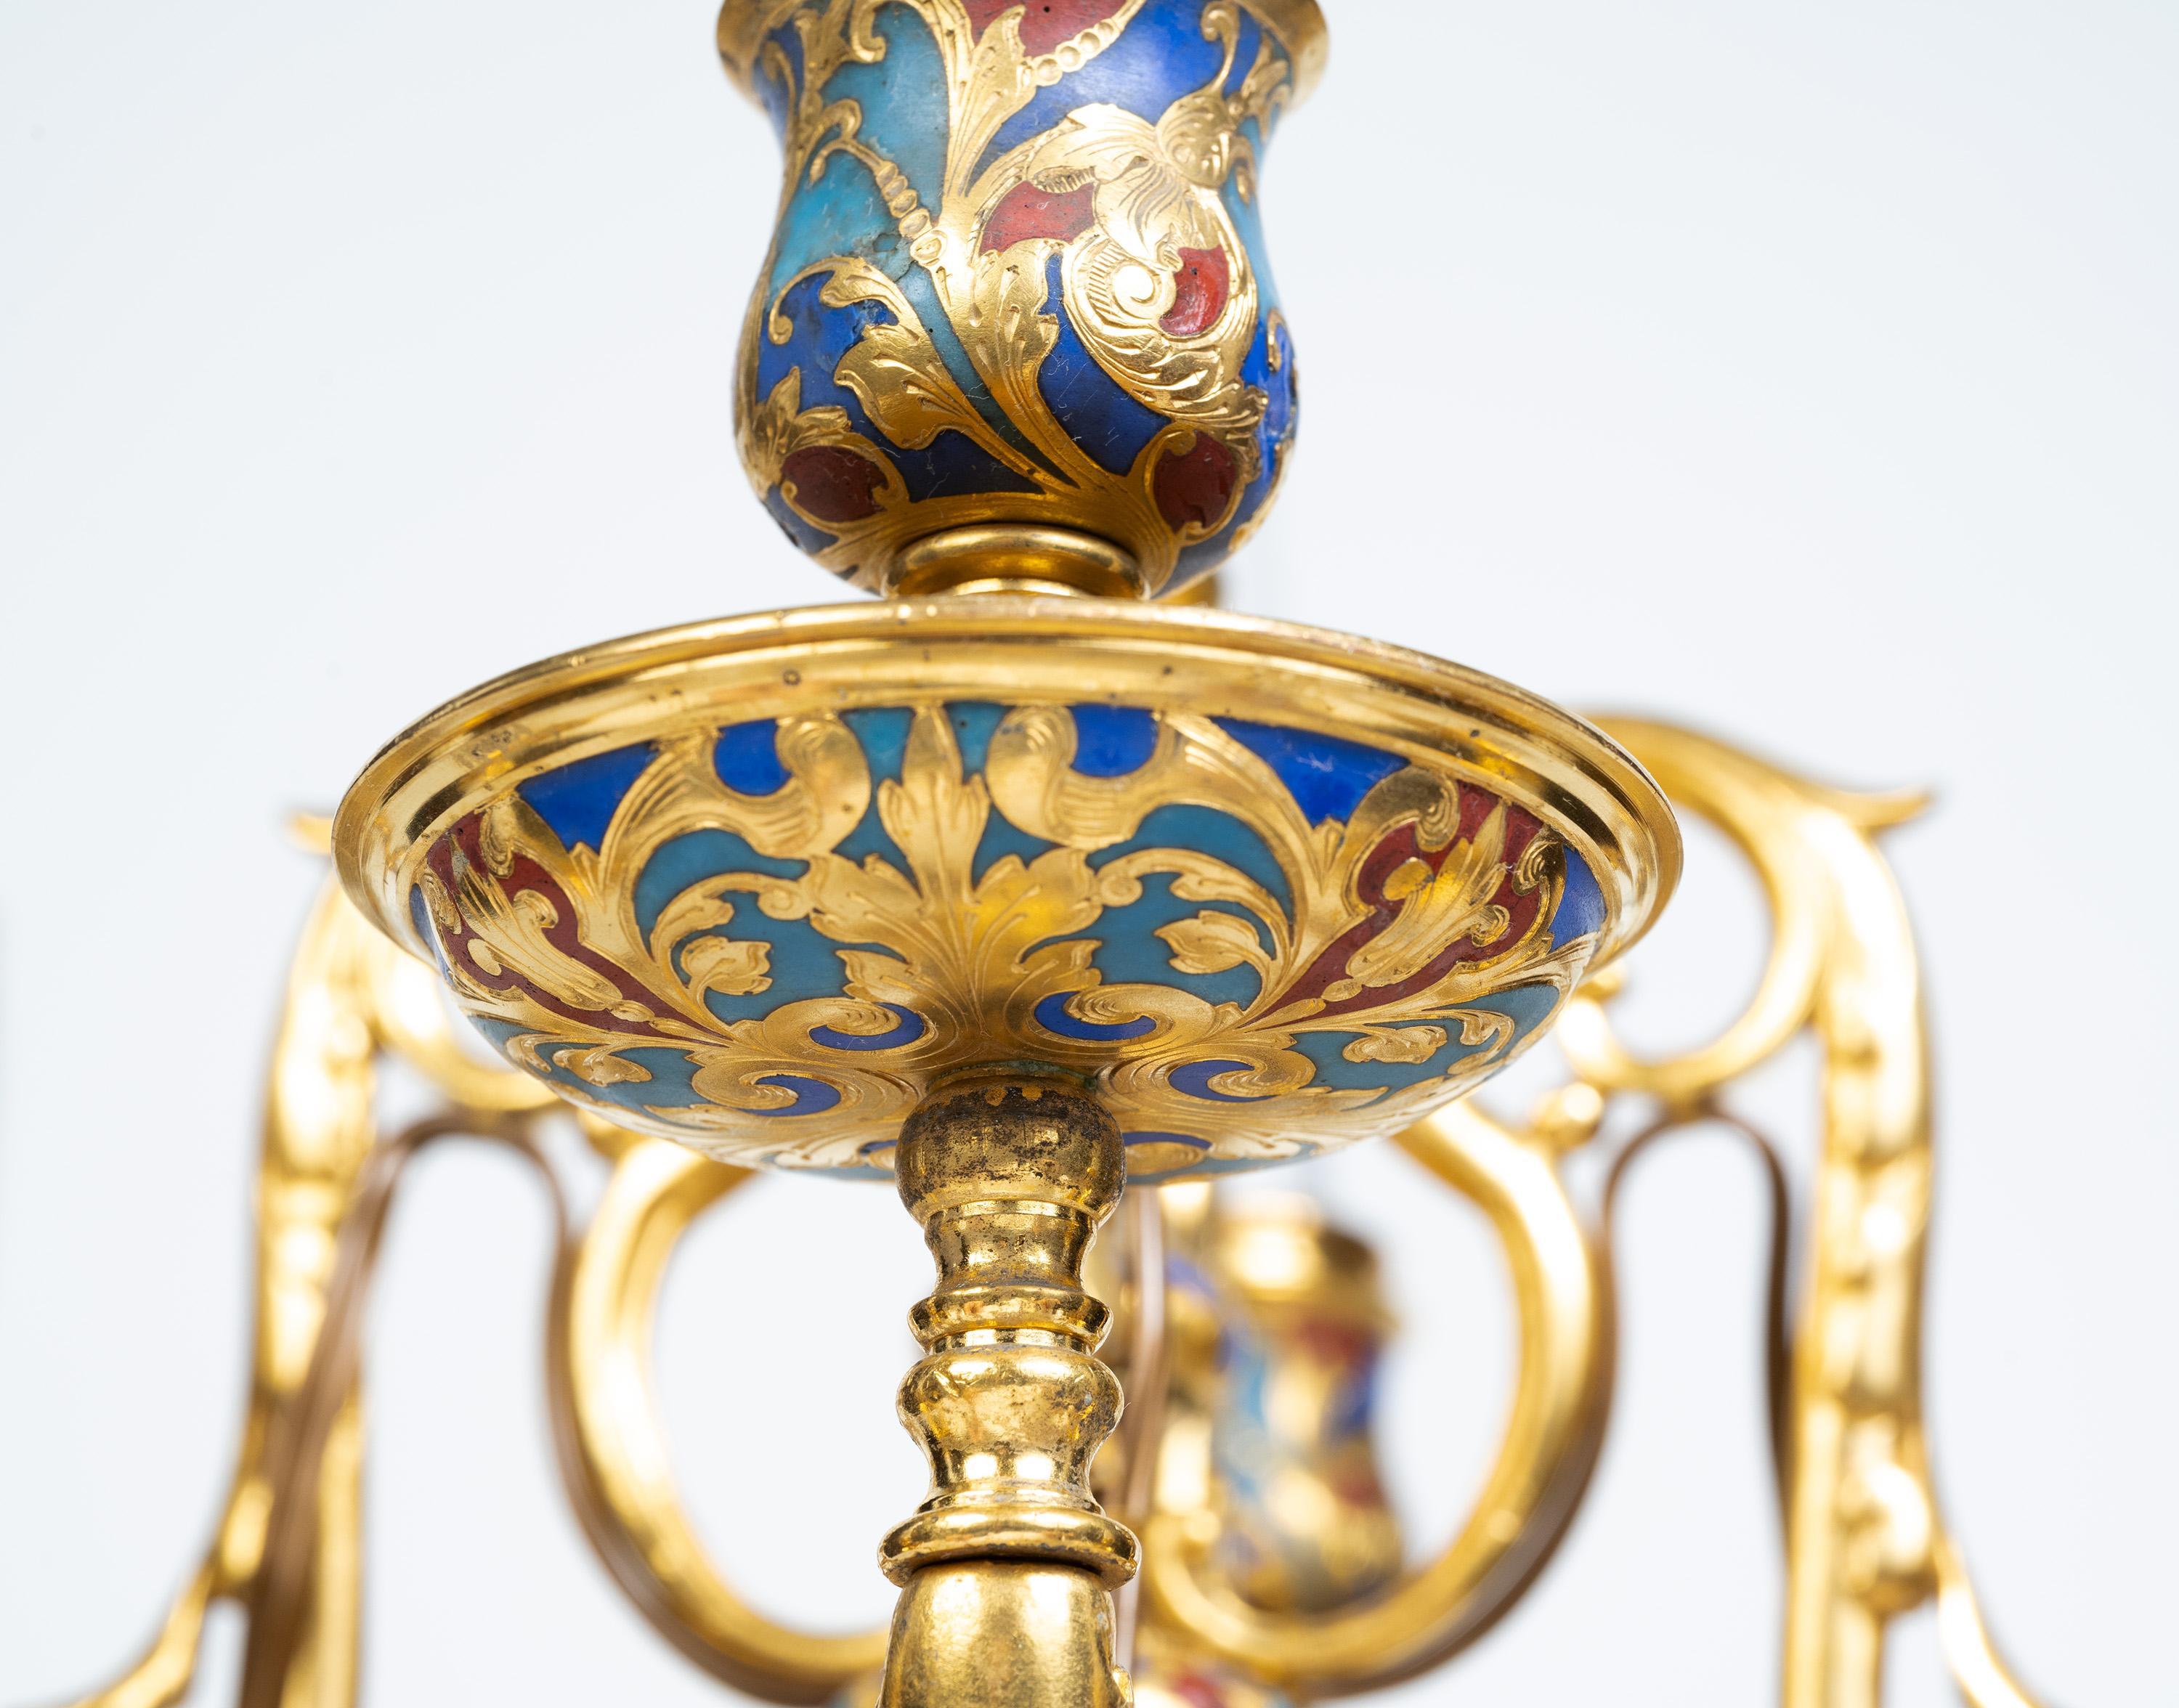 An Exceptional Pair of Champleve Enamel Ormolu Candelabra by Sevin & Barbedienne For Sale 8